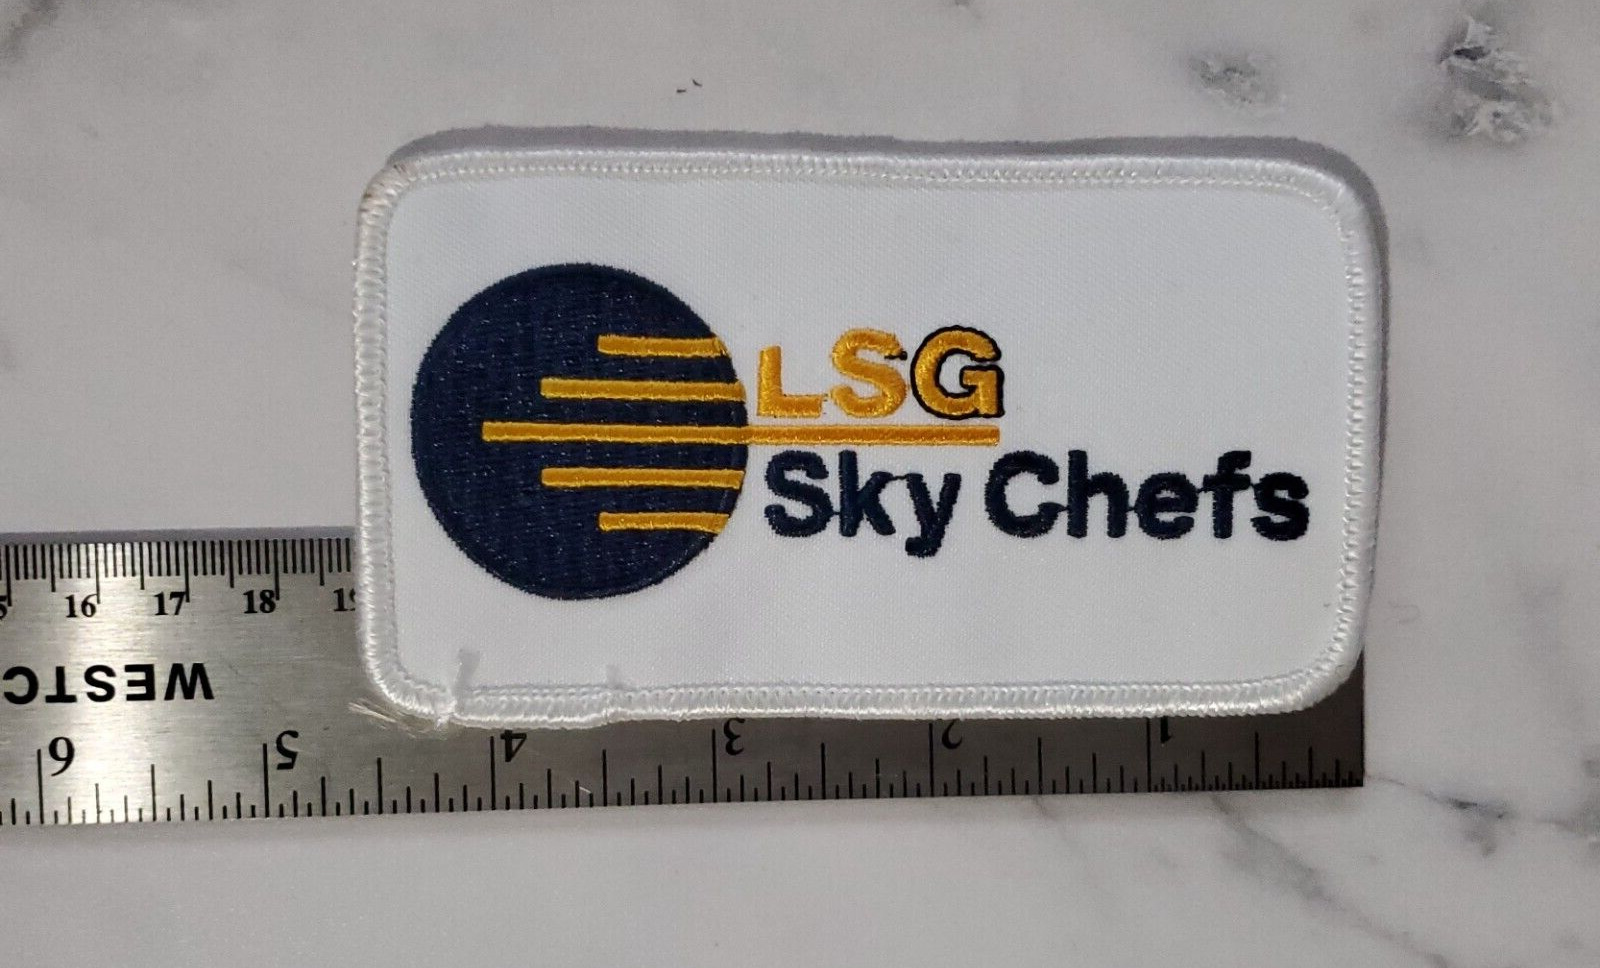 LSG SKY CHEFS AIR AIRLINES FOOD CATERING VINTAGE PATCH UNIFORM BADGE LUFTHANSA